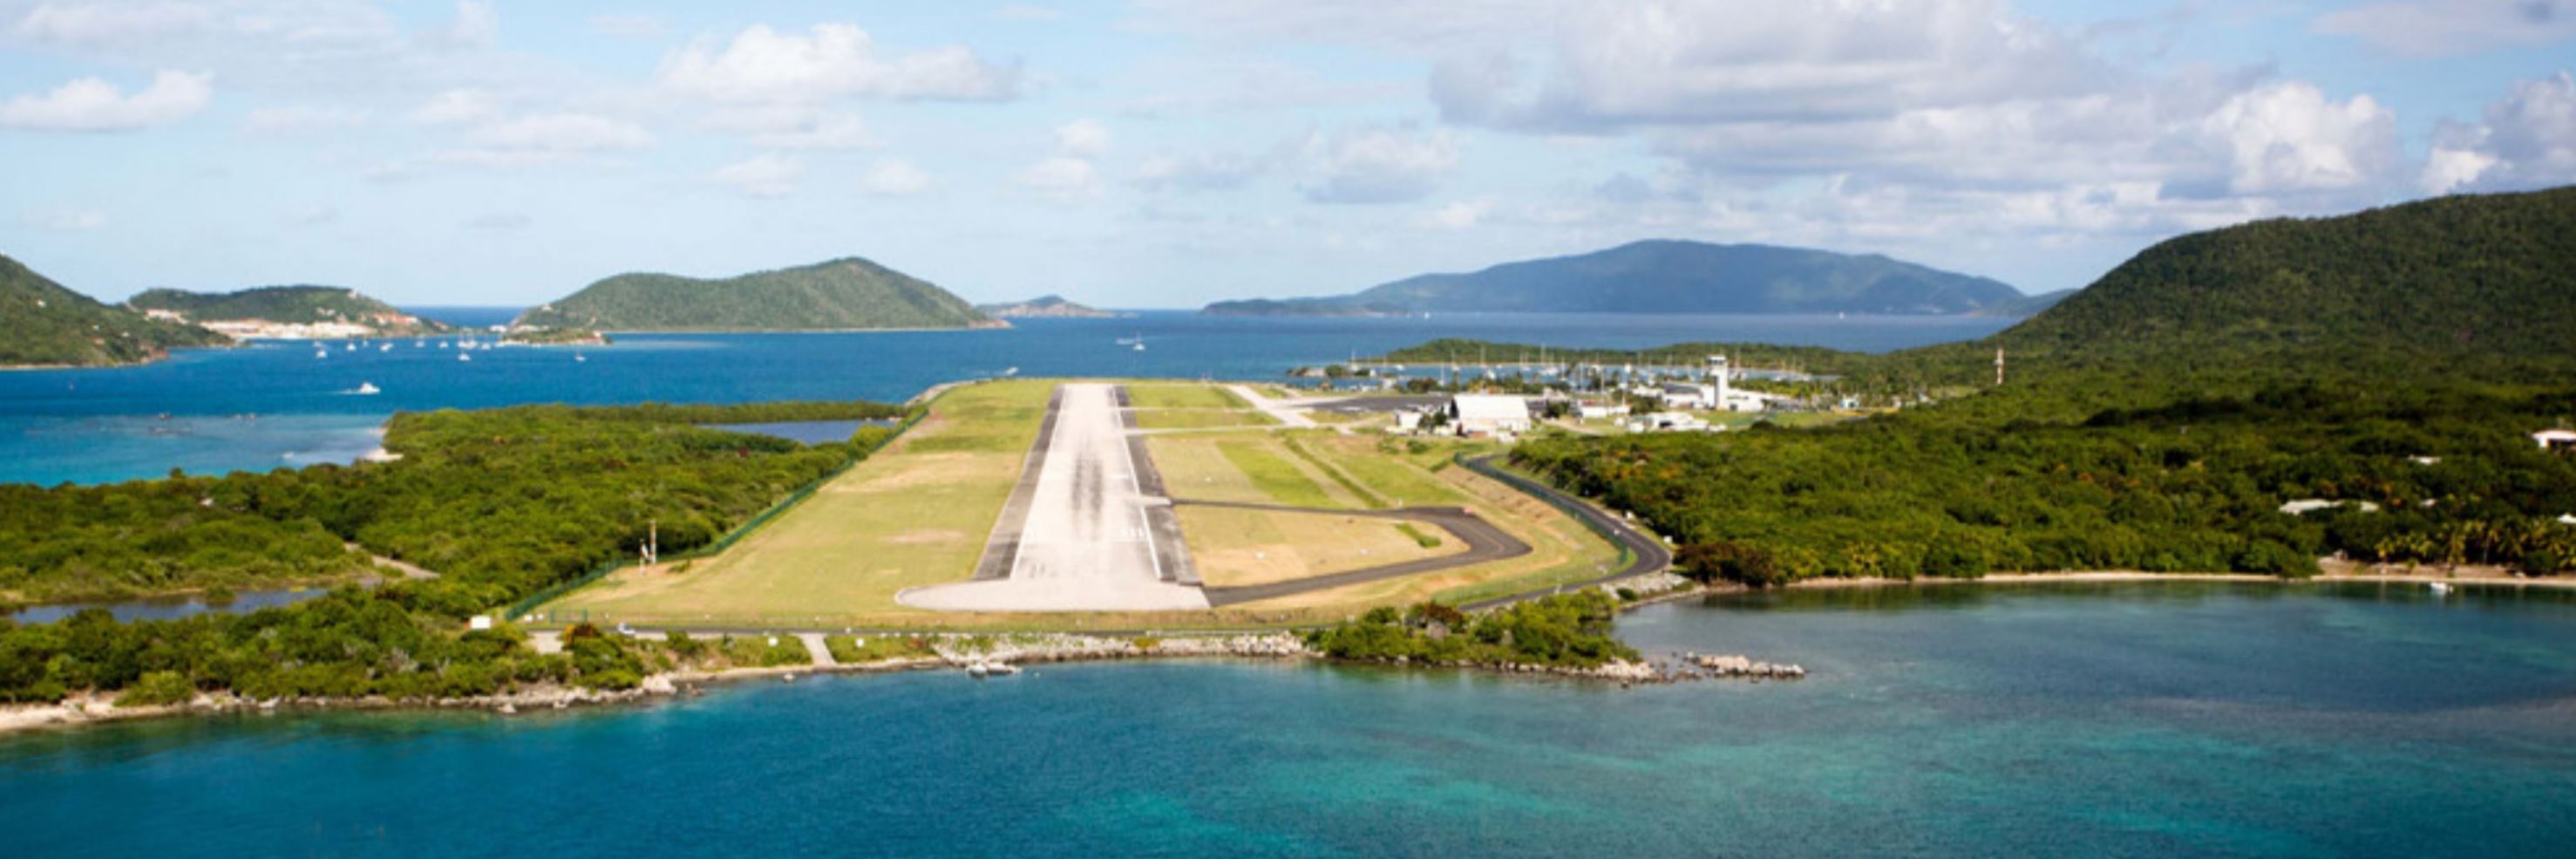 The British Virgin Islands Airports Authority | Business View Caribbean